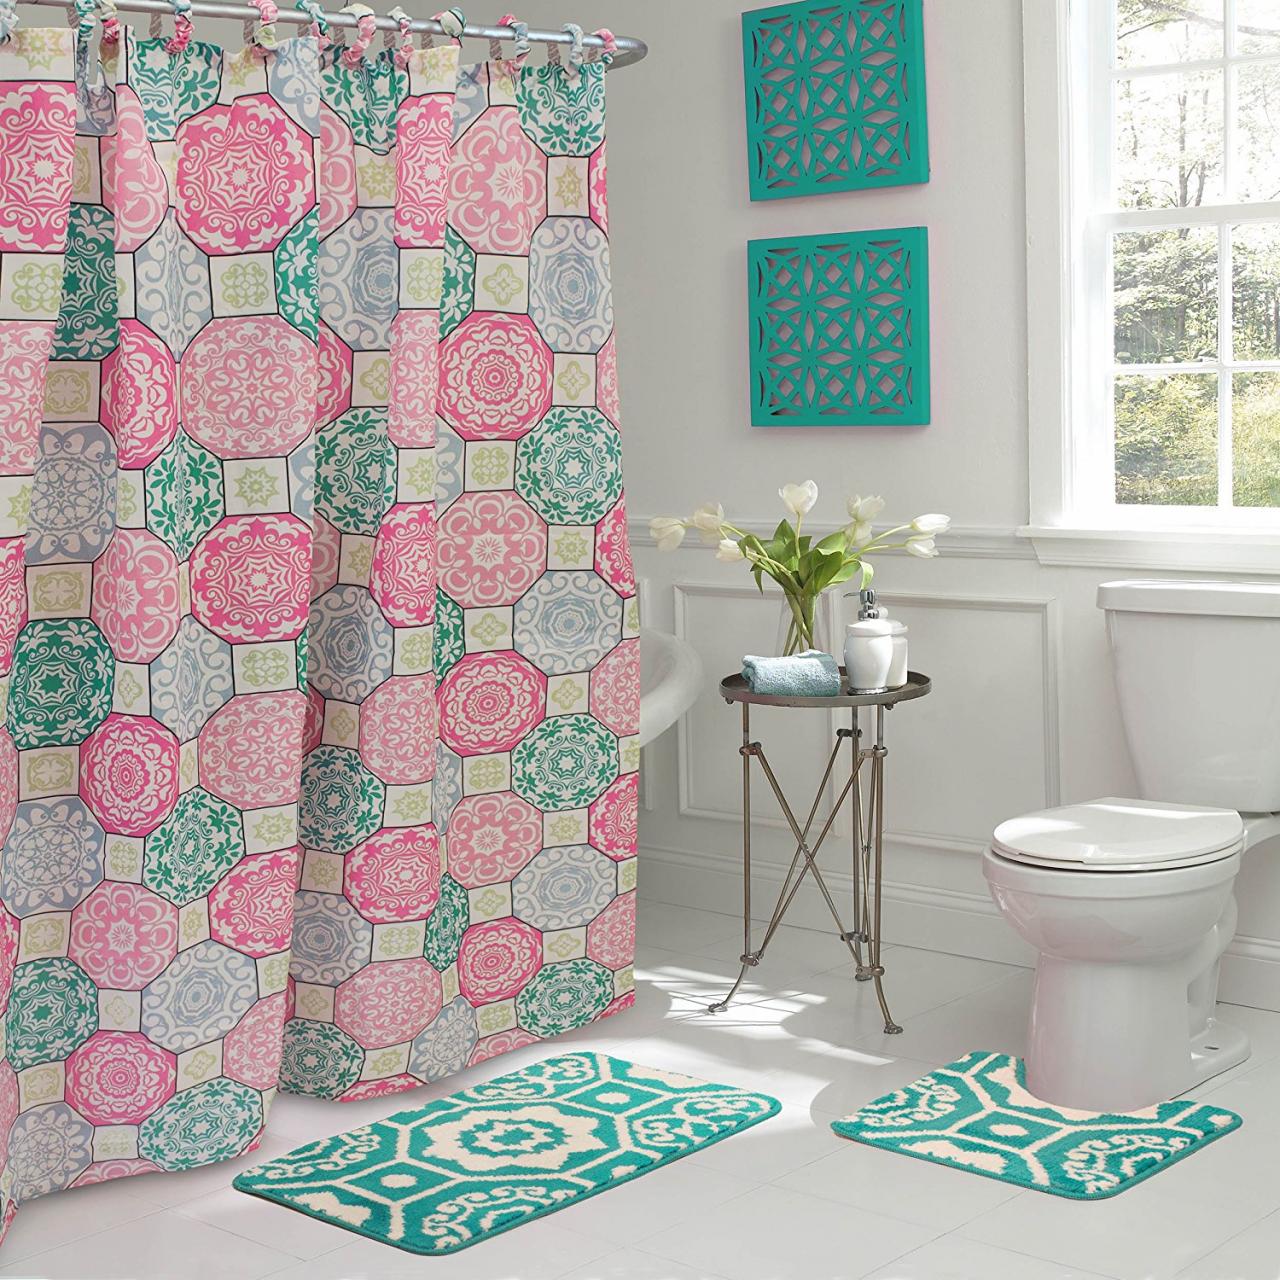 Bathroom Sets with Shower Curtain and Rugs Selection Cool Ideas for Home